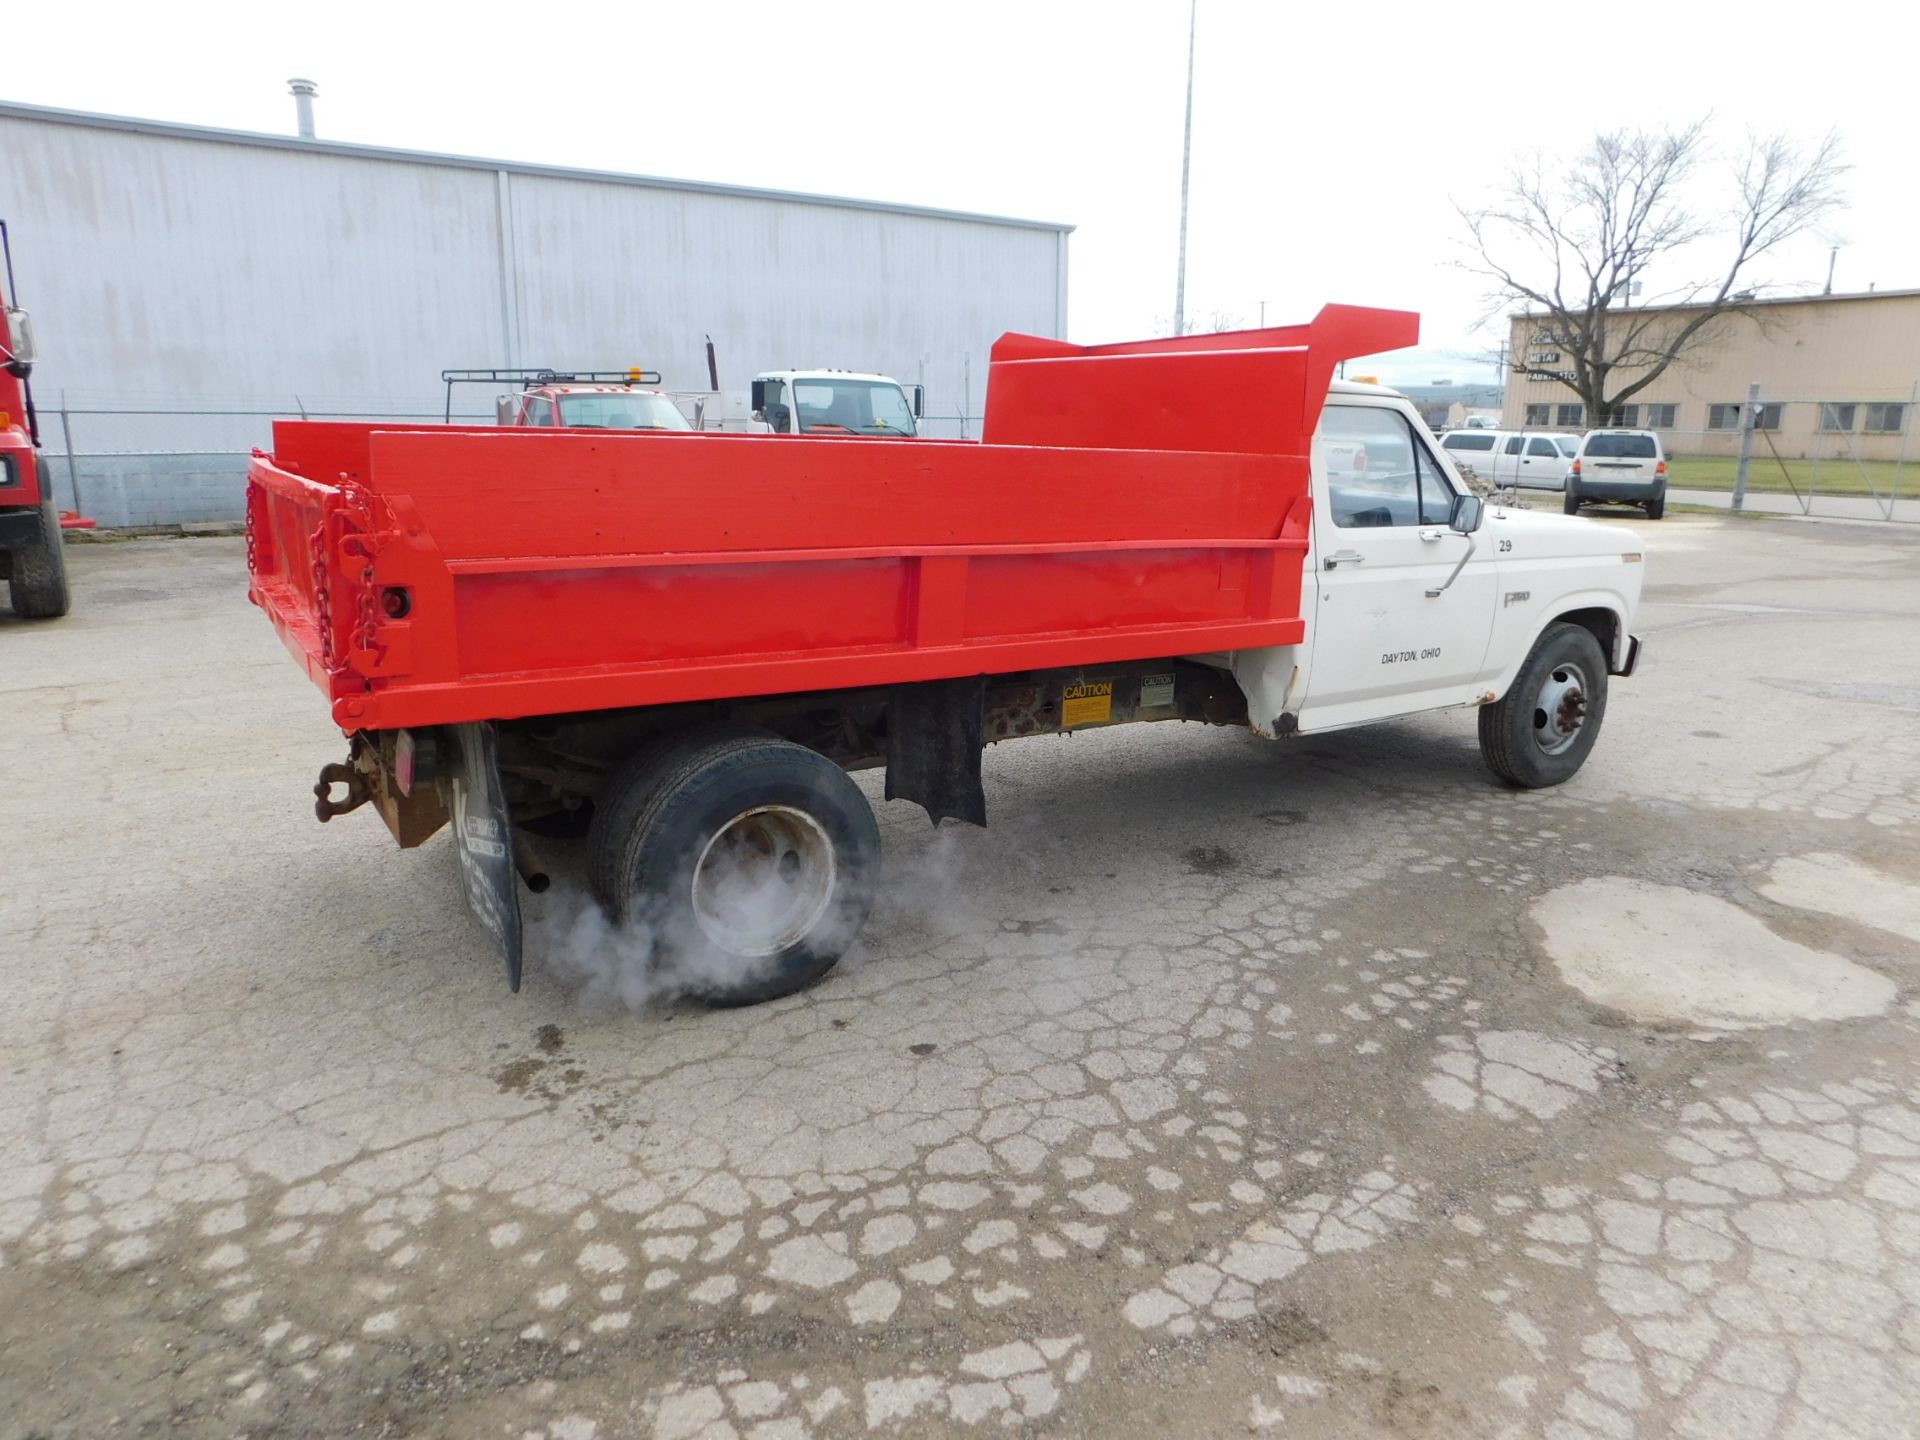 1986 Ford F-350 Single Axle Dump, Gas, 4-Speed Manual Transmission, PTO, 10' Steel Dump Bed, 81, - Image 5 of 18